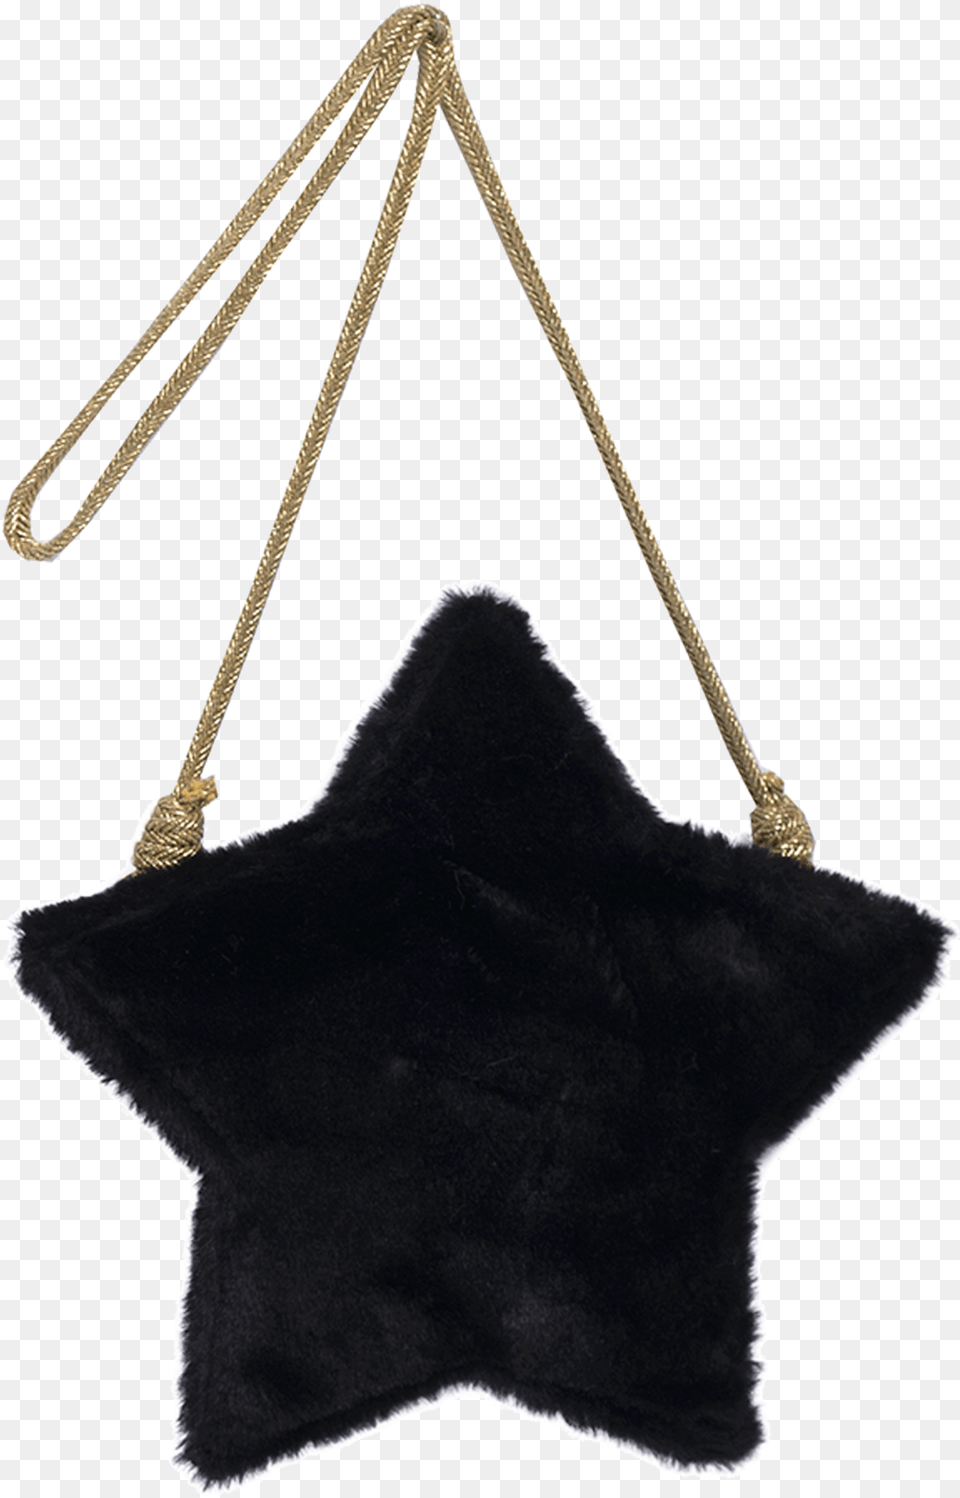 Black Faux Fur Girls Purse In The Shape Of A Star With Shoulder Bag, Accessories, Handbag, Home Decor Free Png Download